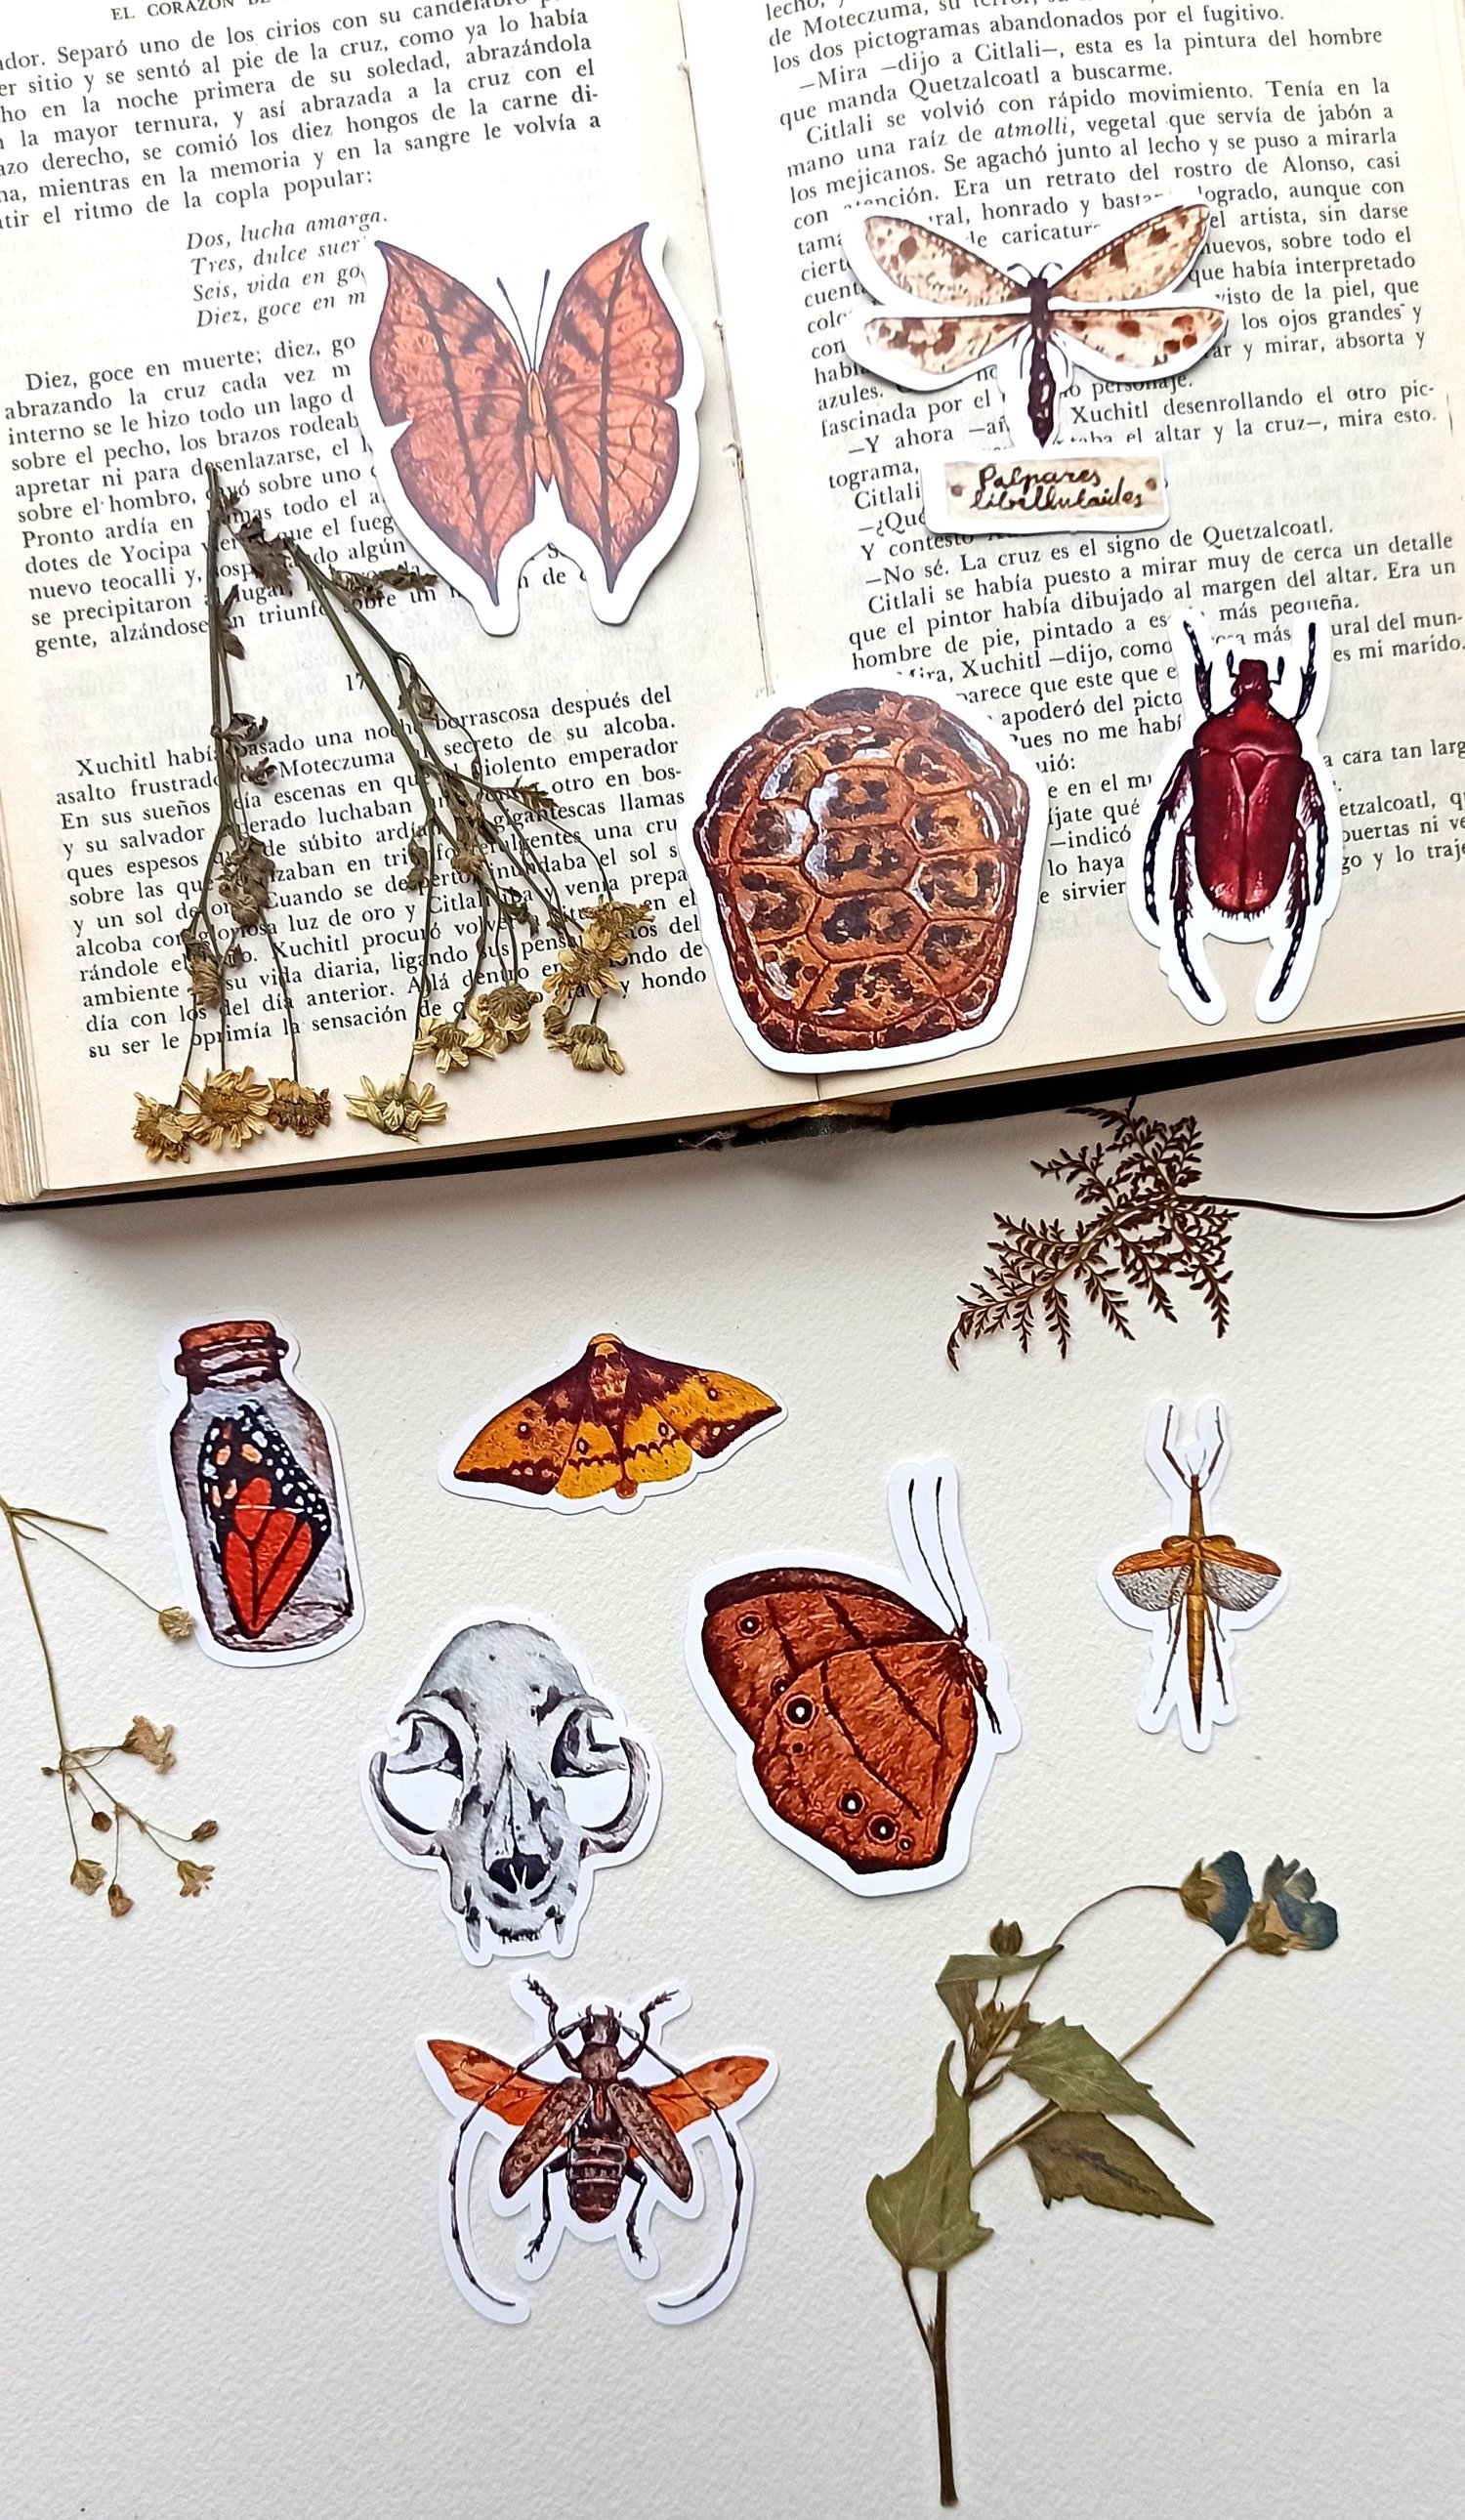 Image of Oddities and Bugs Stickers 